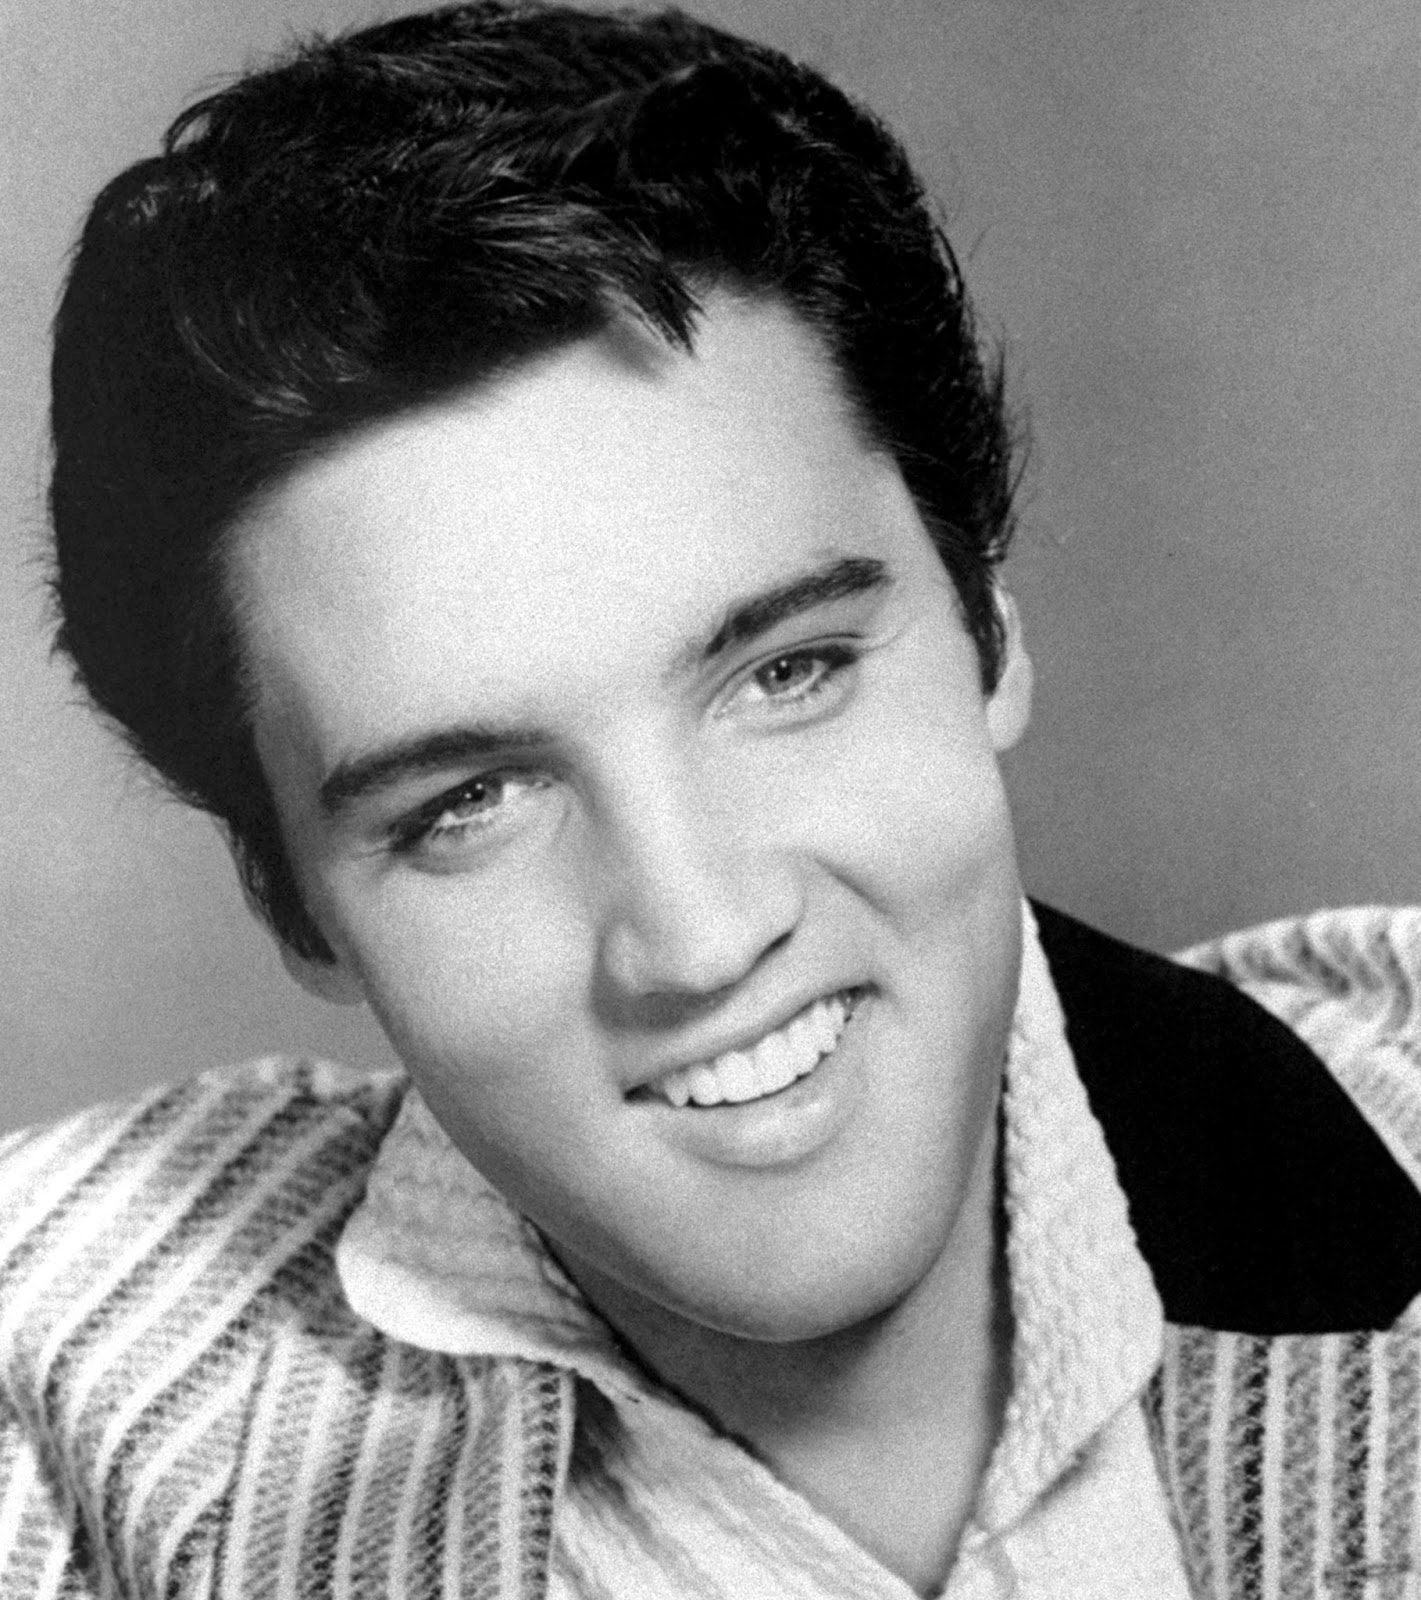 Have I Told You Lately That I Love You? by Elvis Presley